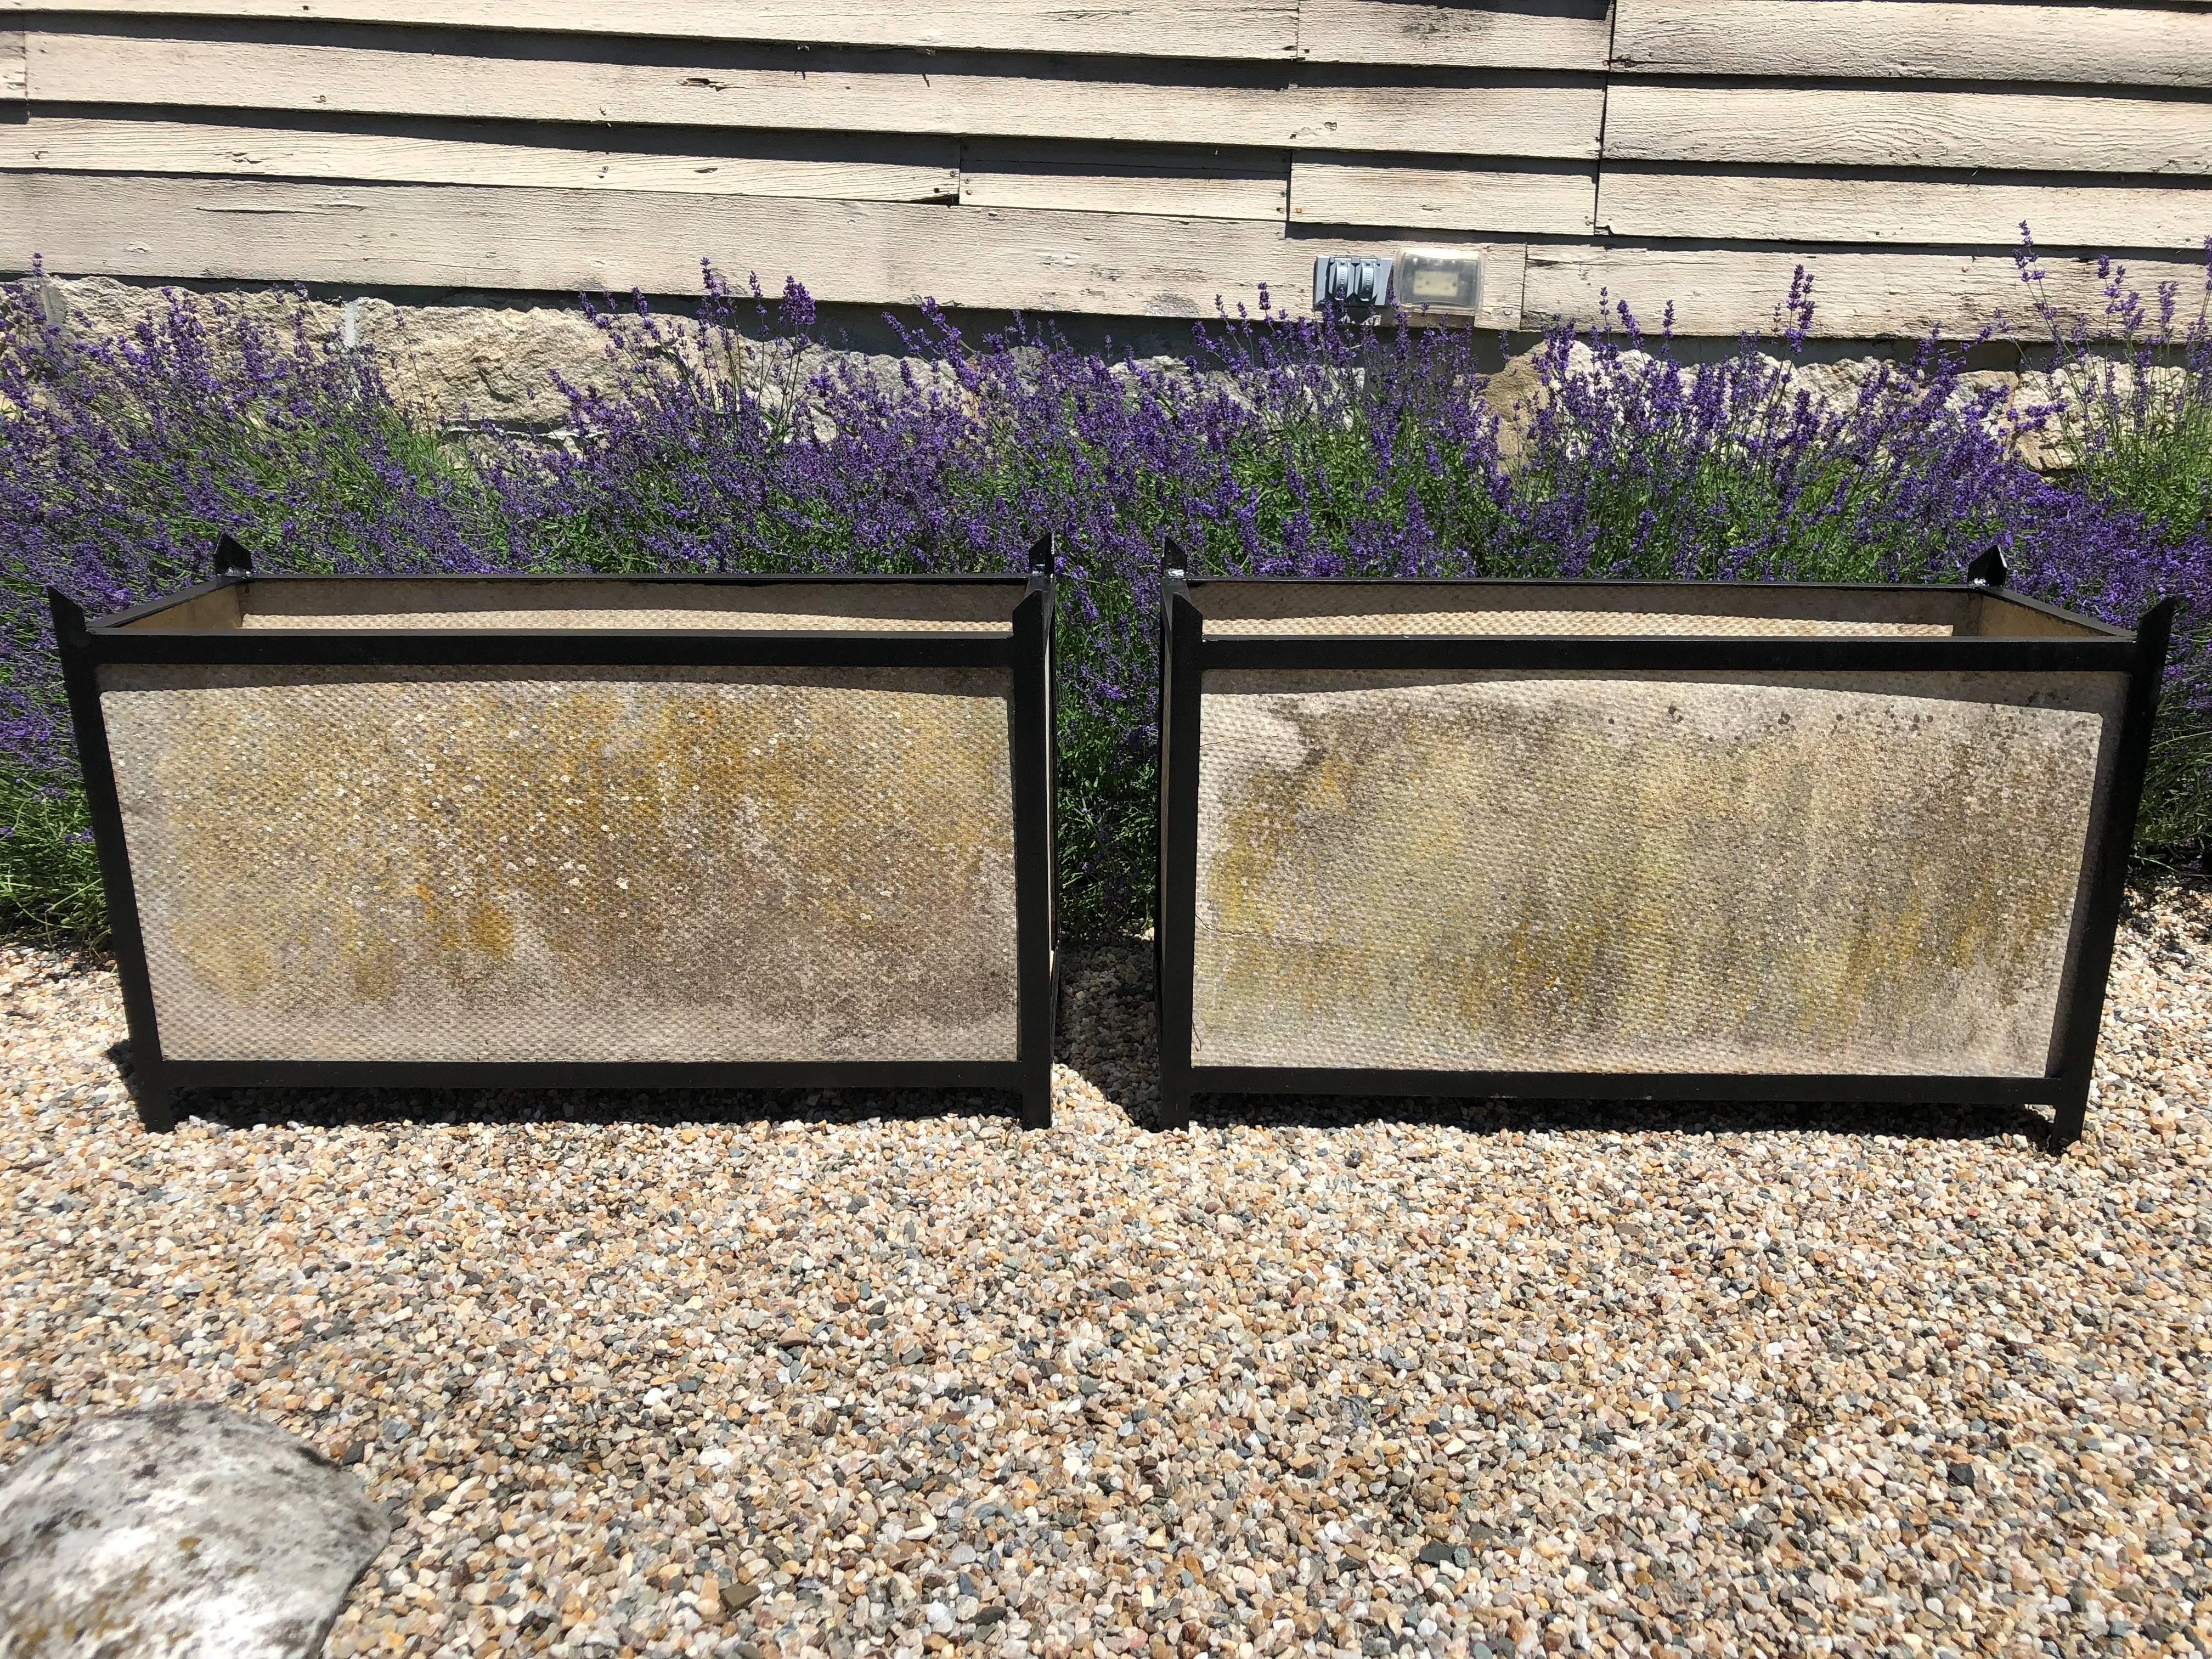 This is a very rare planter model designed by Willy Guhl and produced by Eternit of Switzerland. Documented by catalog, they feature steel frames (newly-painted in satin black by us) and lightweight, durable fiber cement panels that have been